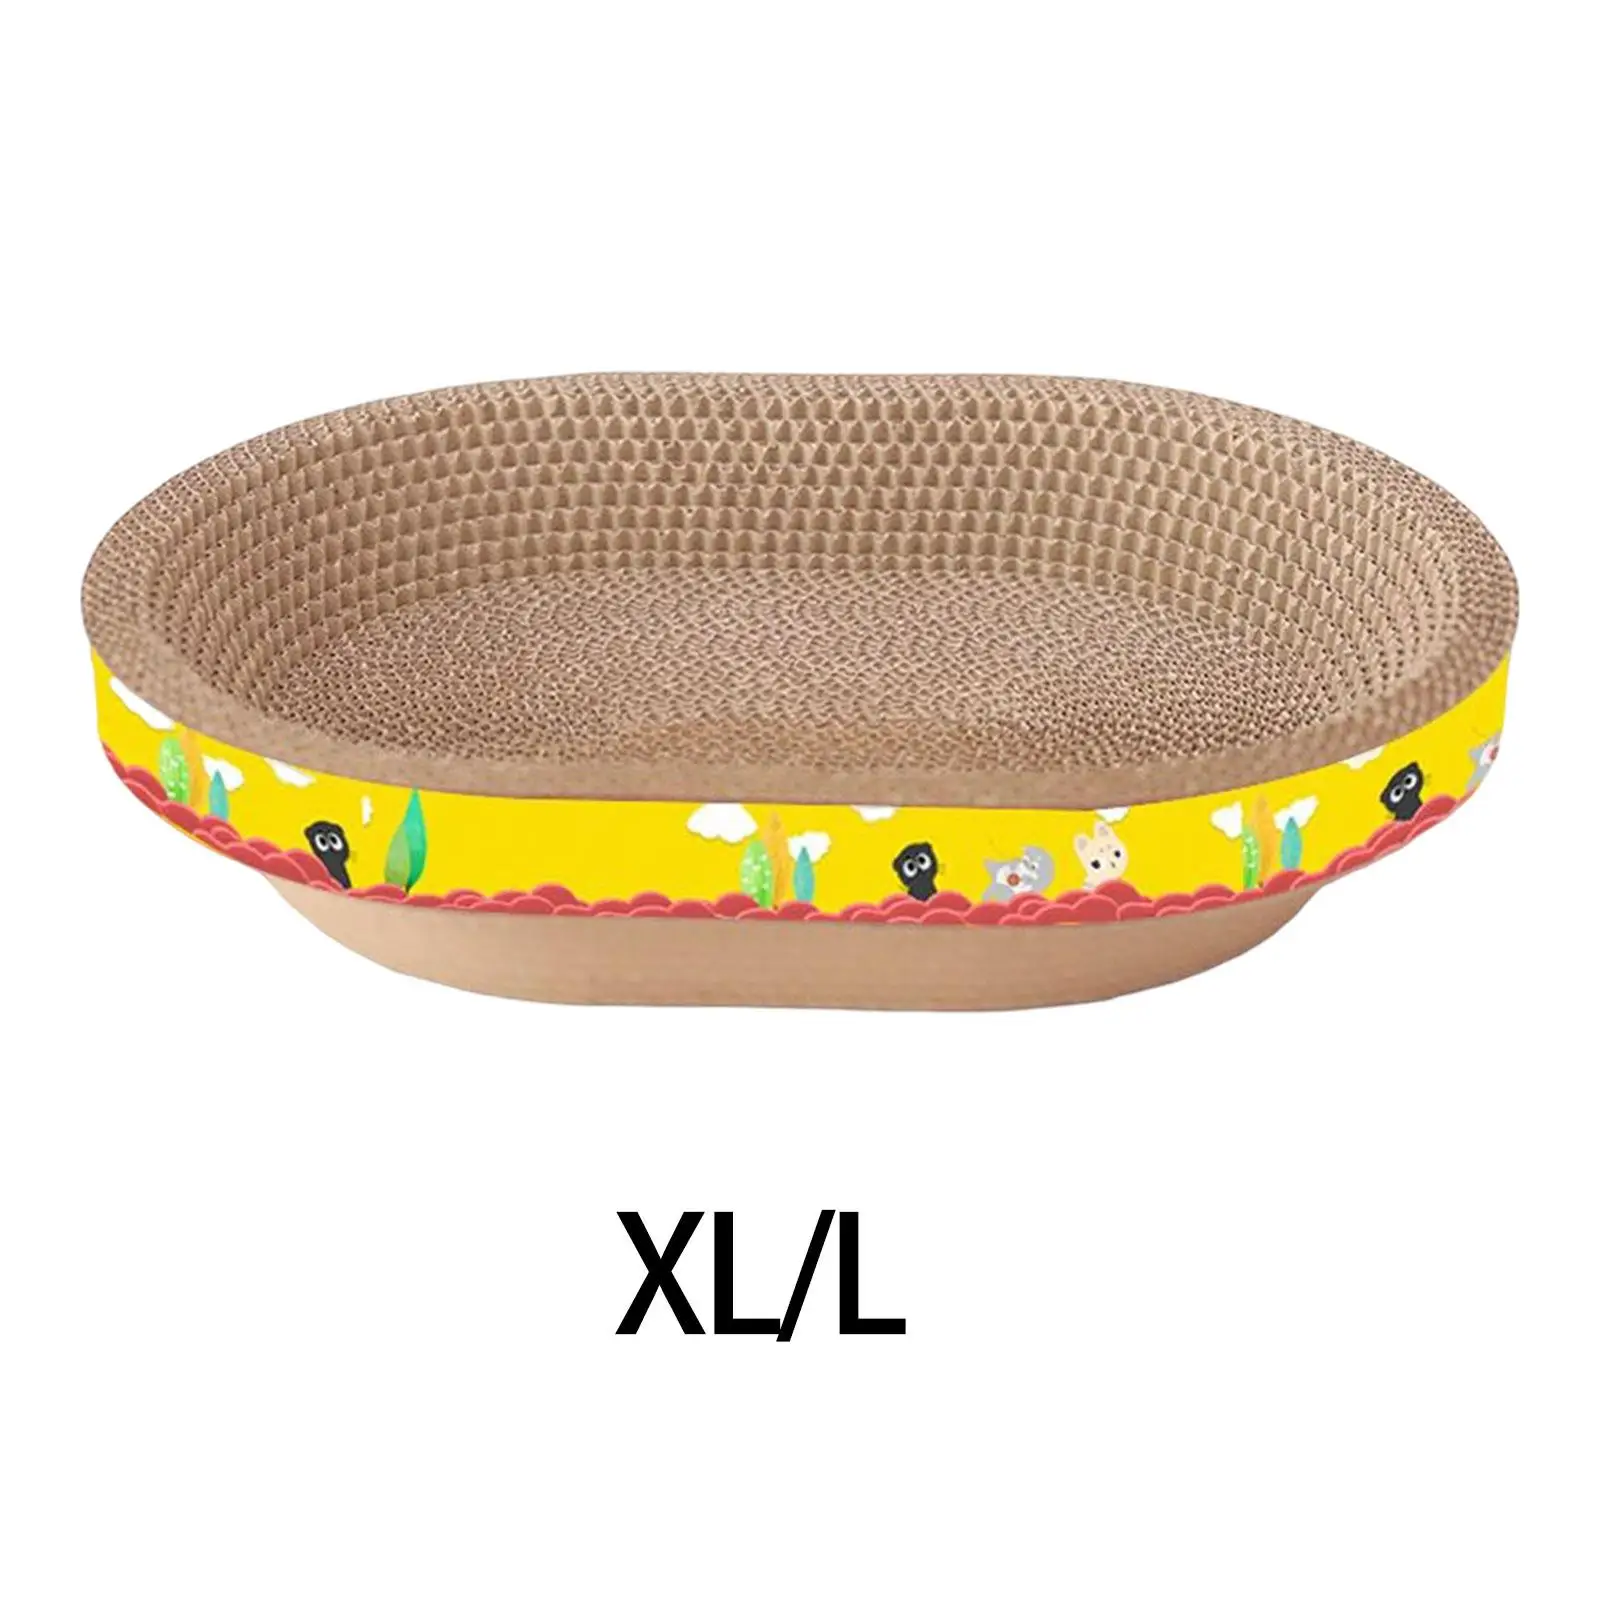 Pet Cat Scratcher Oval Cat Scratch scatching Toy Furniture Protection Recyclable